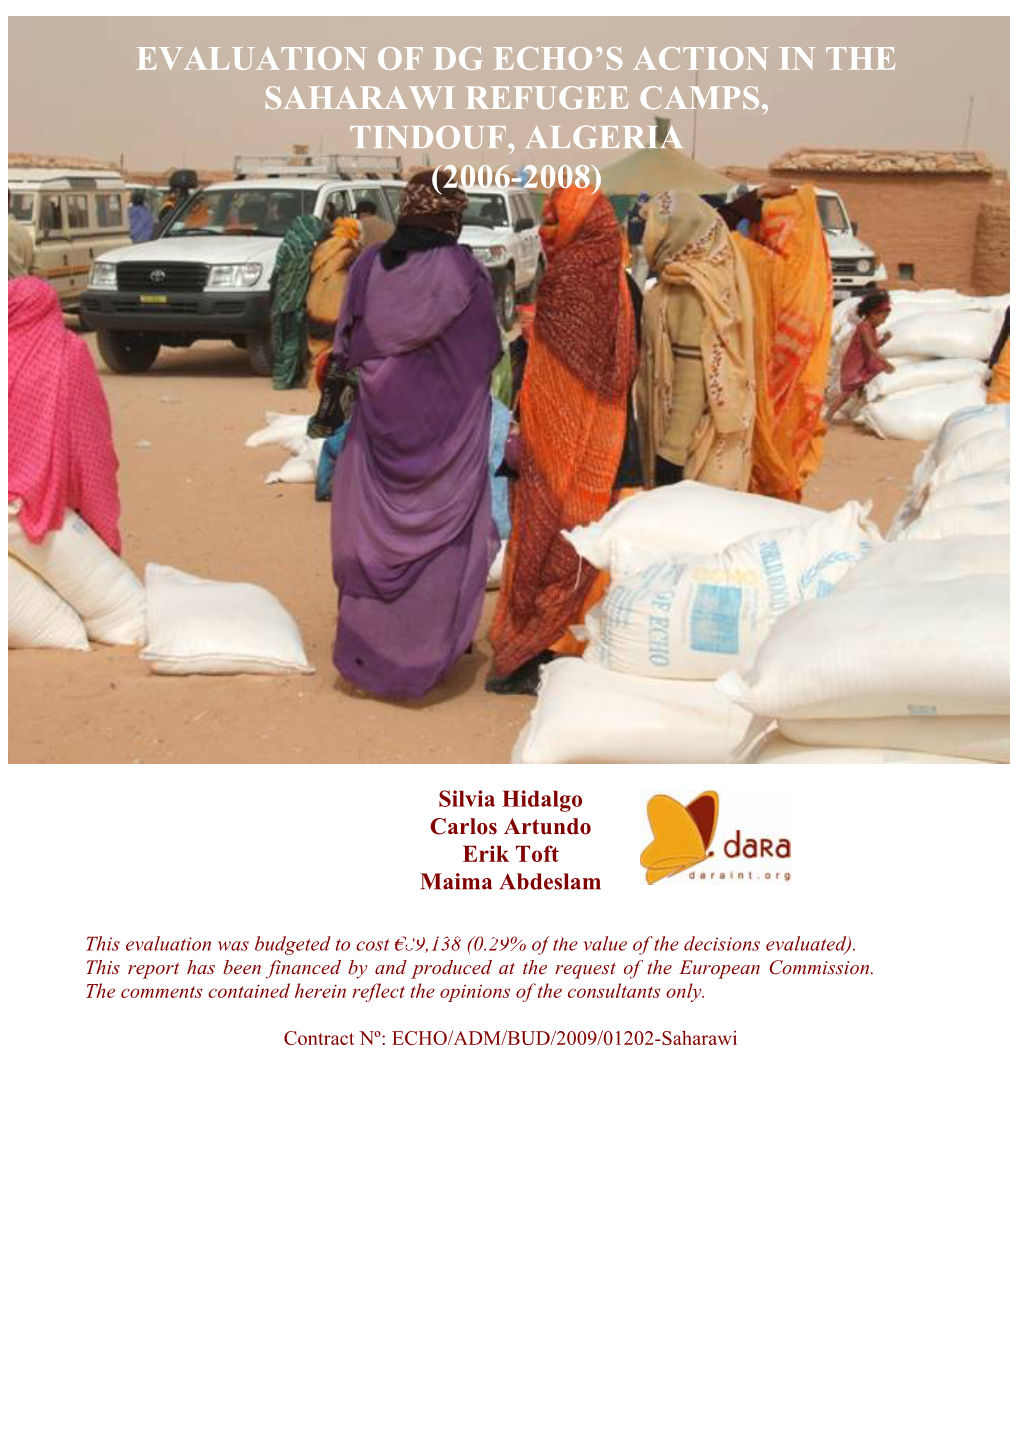 Evaluation of ECHO's Action in the Saharawi Refugee Camps, Tindouf